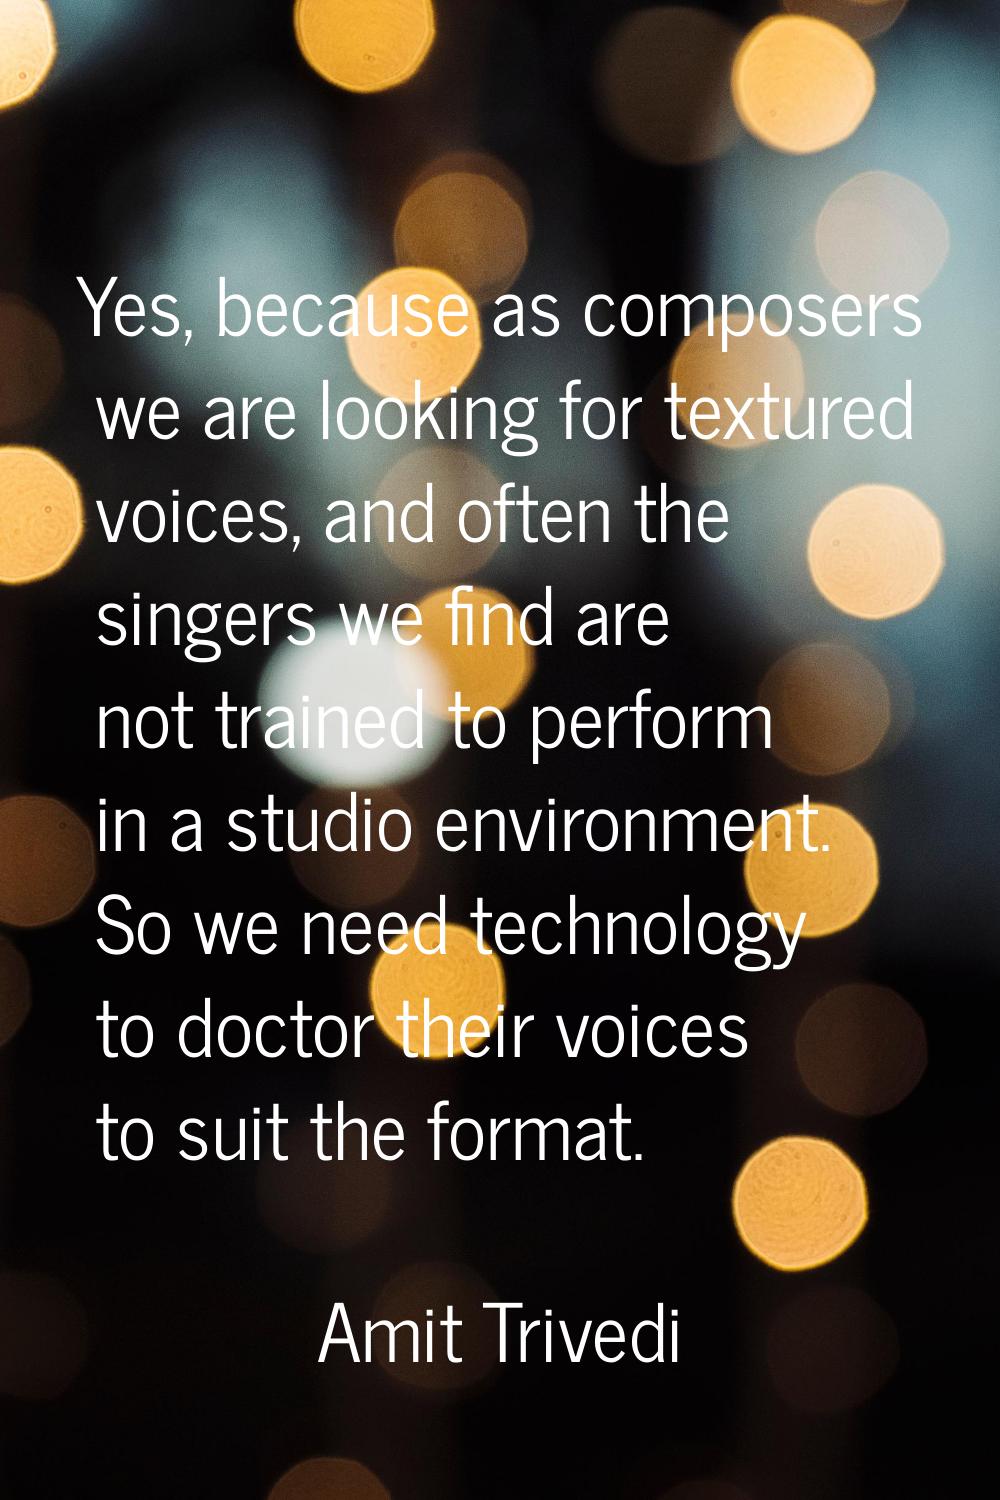 Yes, because as composers we are looking for textured voices, and often the singers we find are not